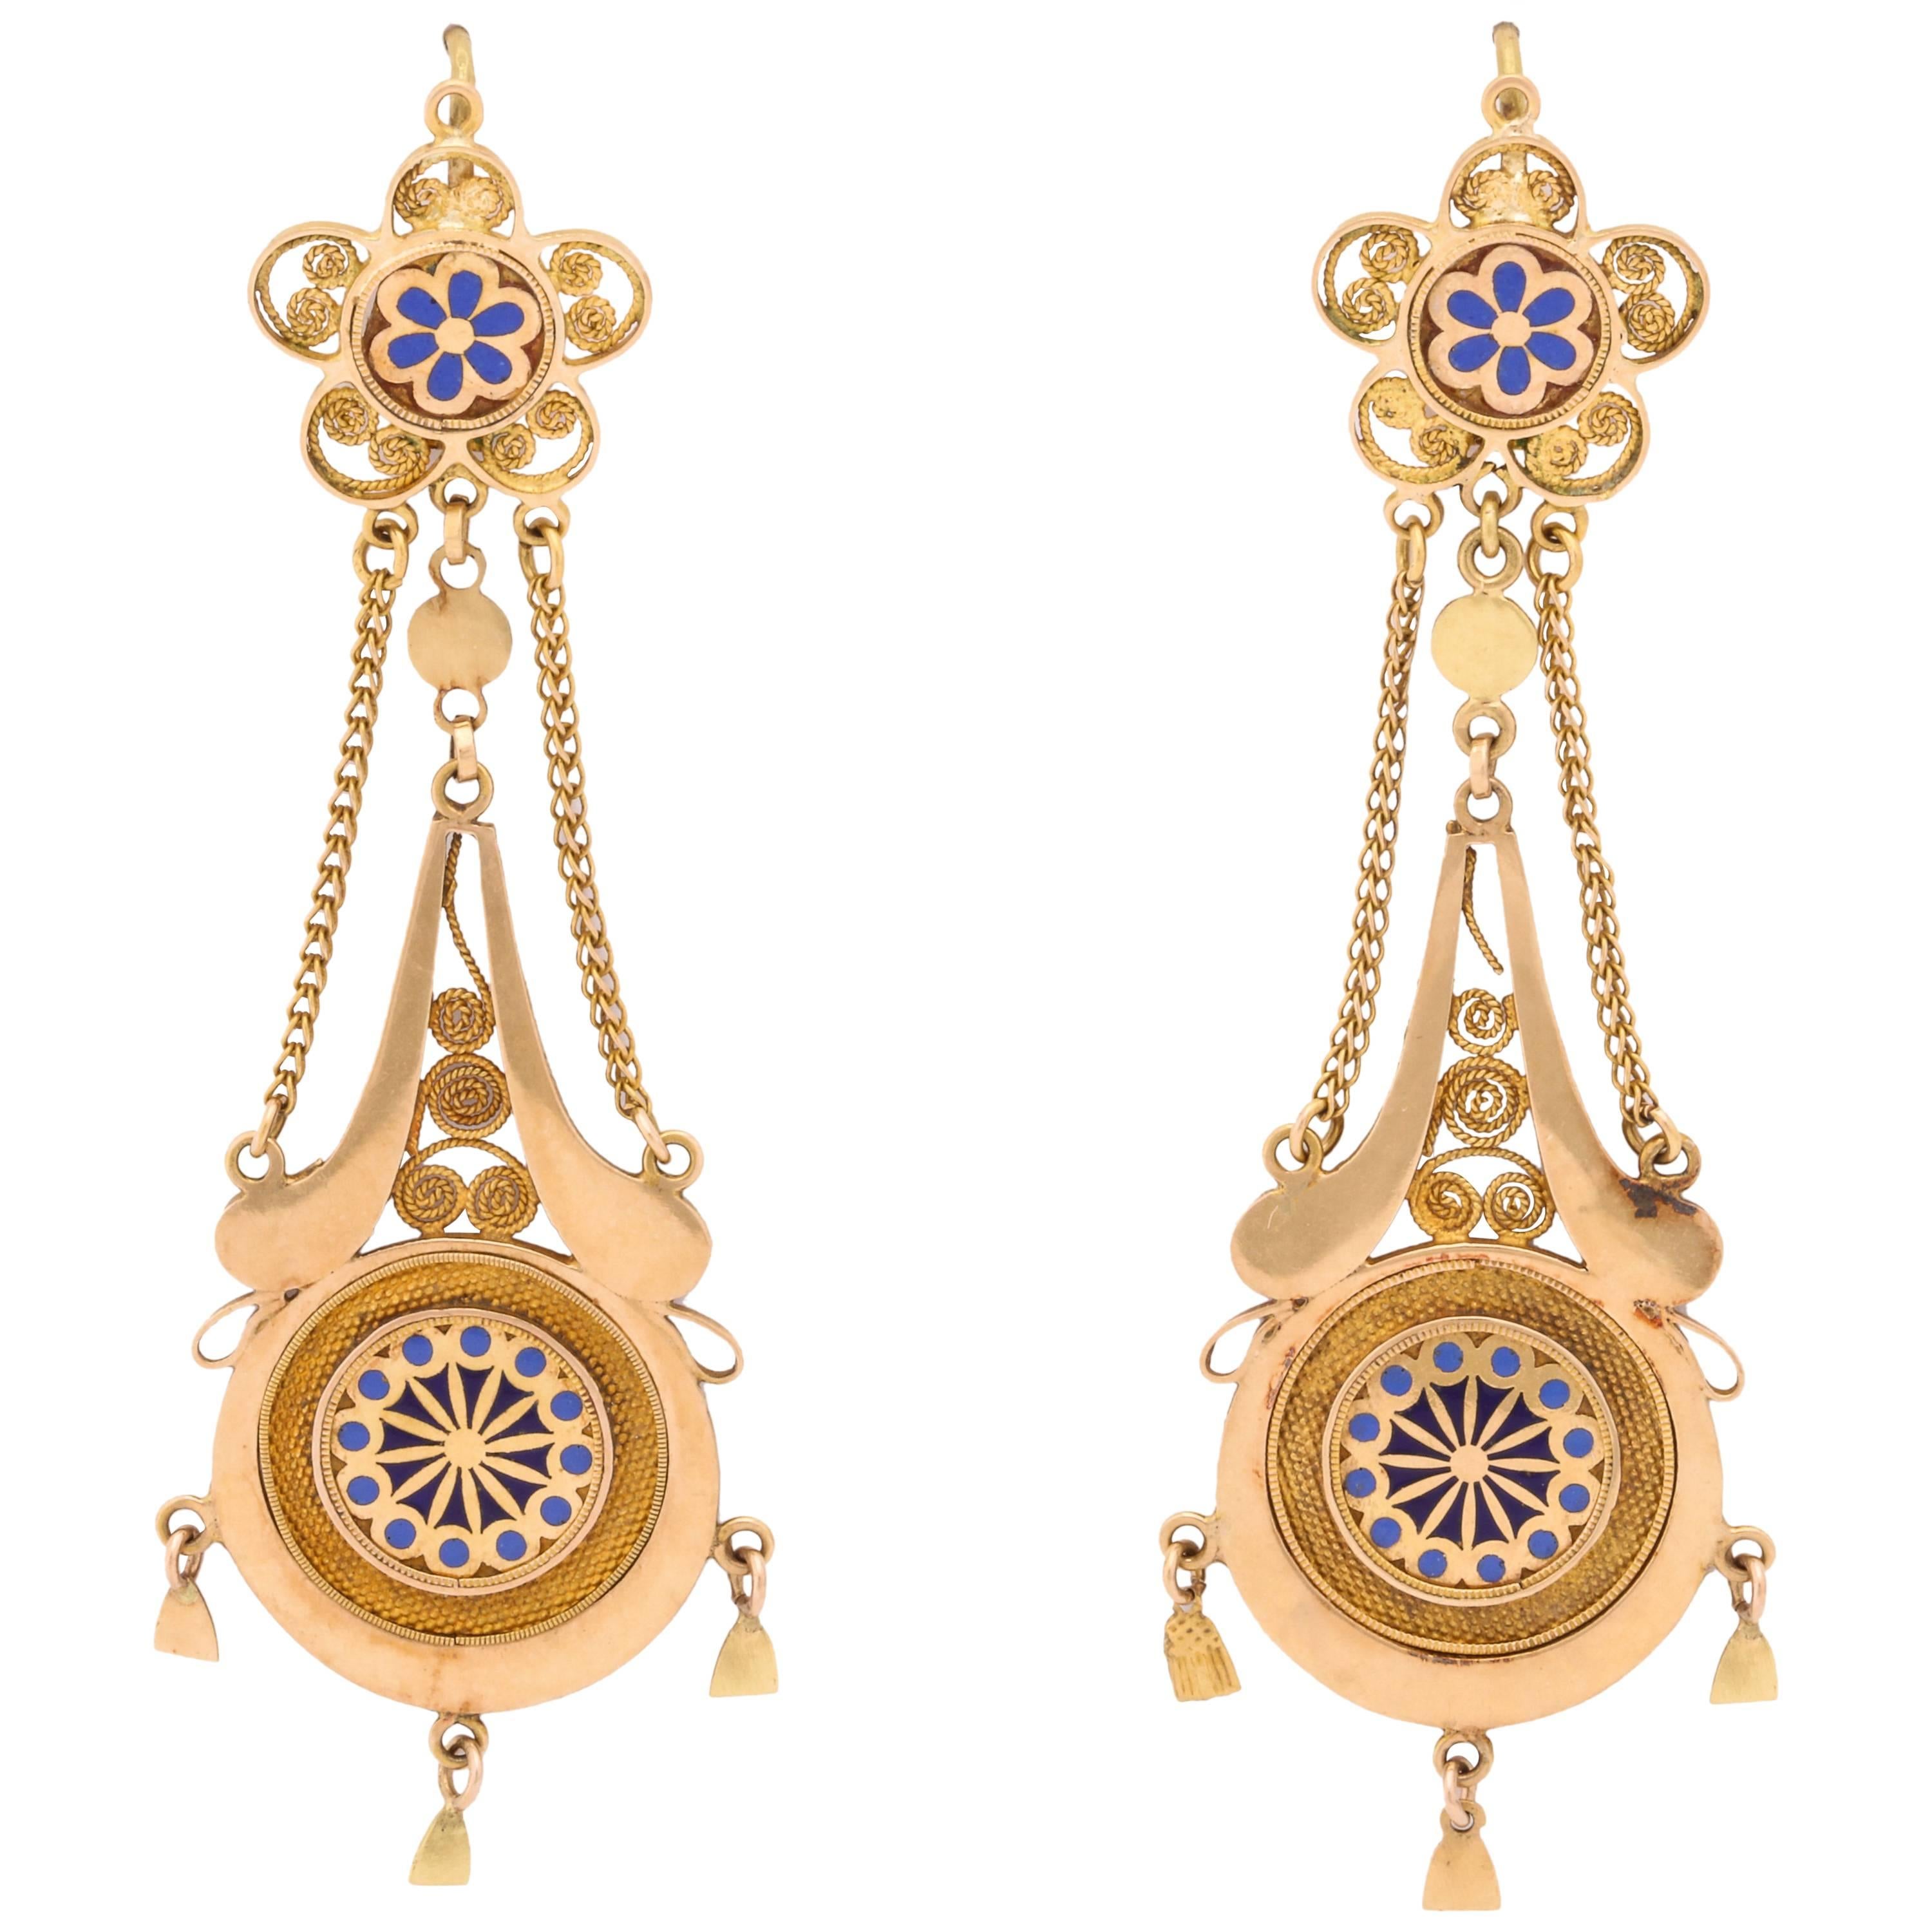 Antique 19th Century French Chandelier Earrings